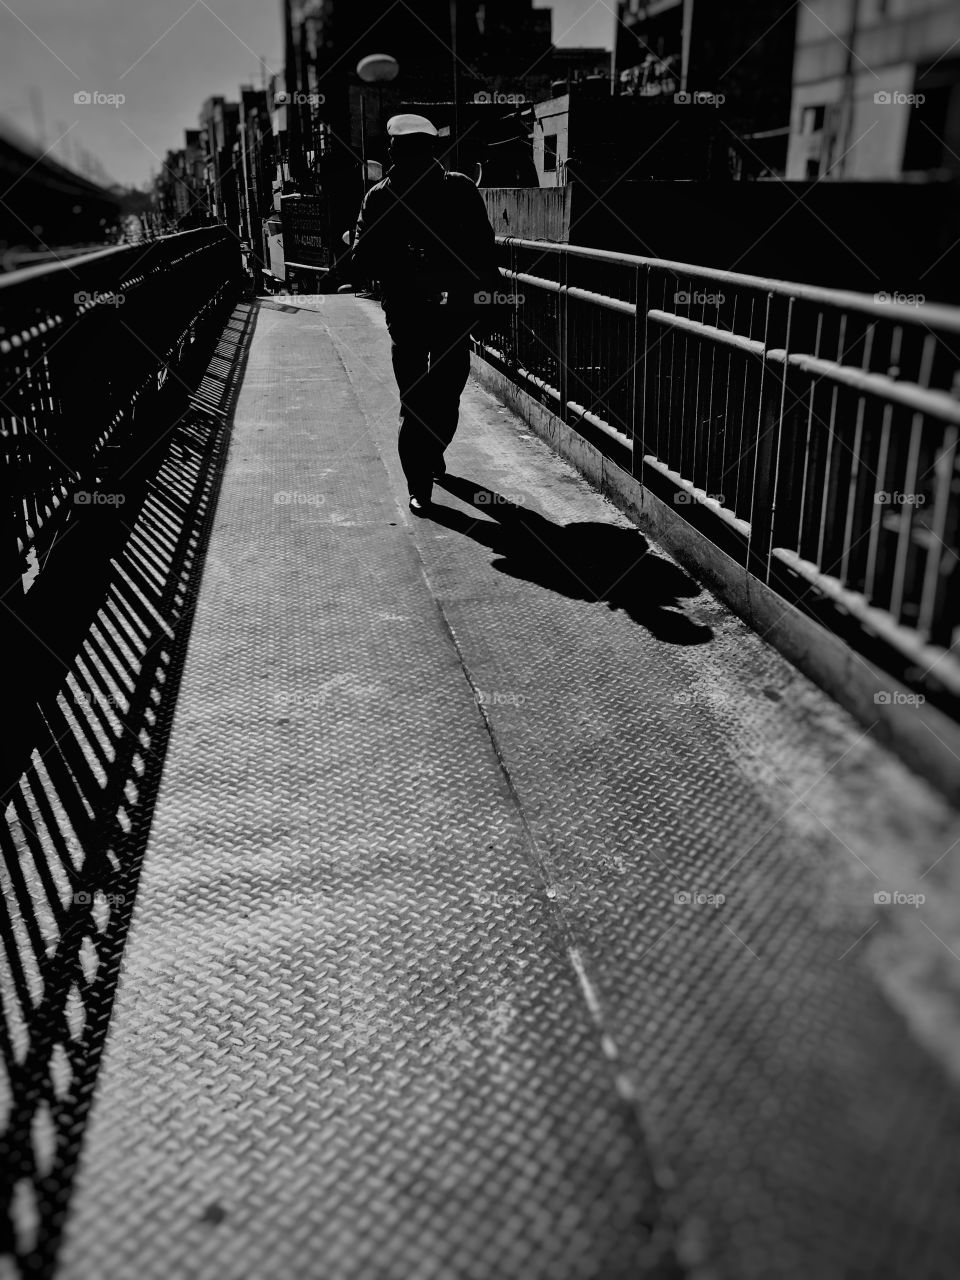 Bnw! City street lige photography! A men just crossed the bridge and i was ready to capture that moment!